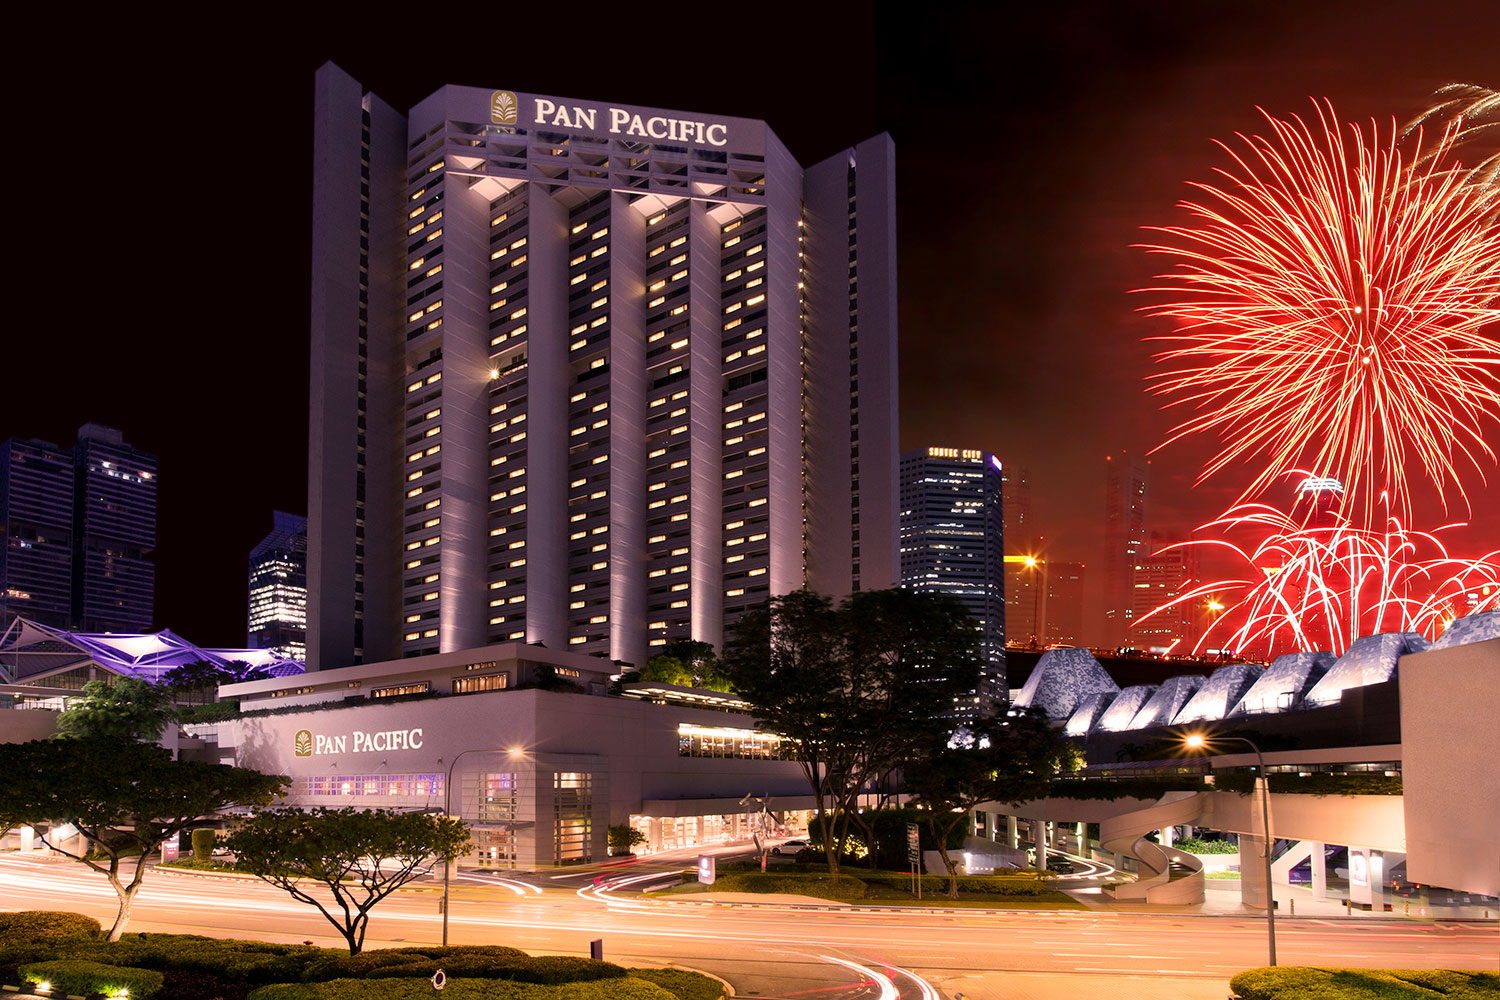 Celebrate Singapore's 53rd Birthday with these GREAT Deals!